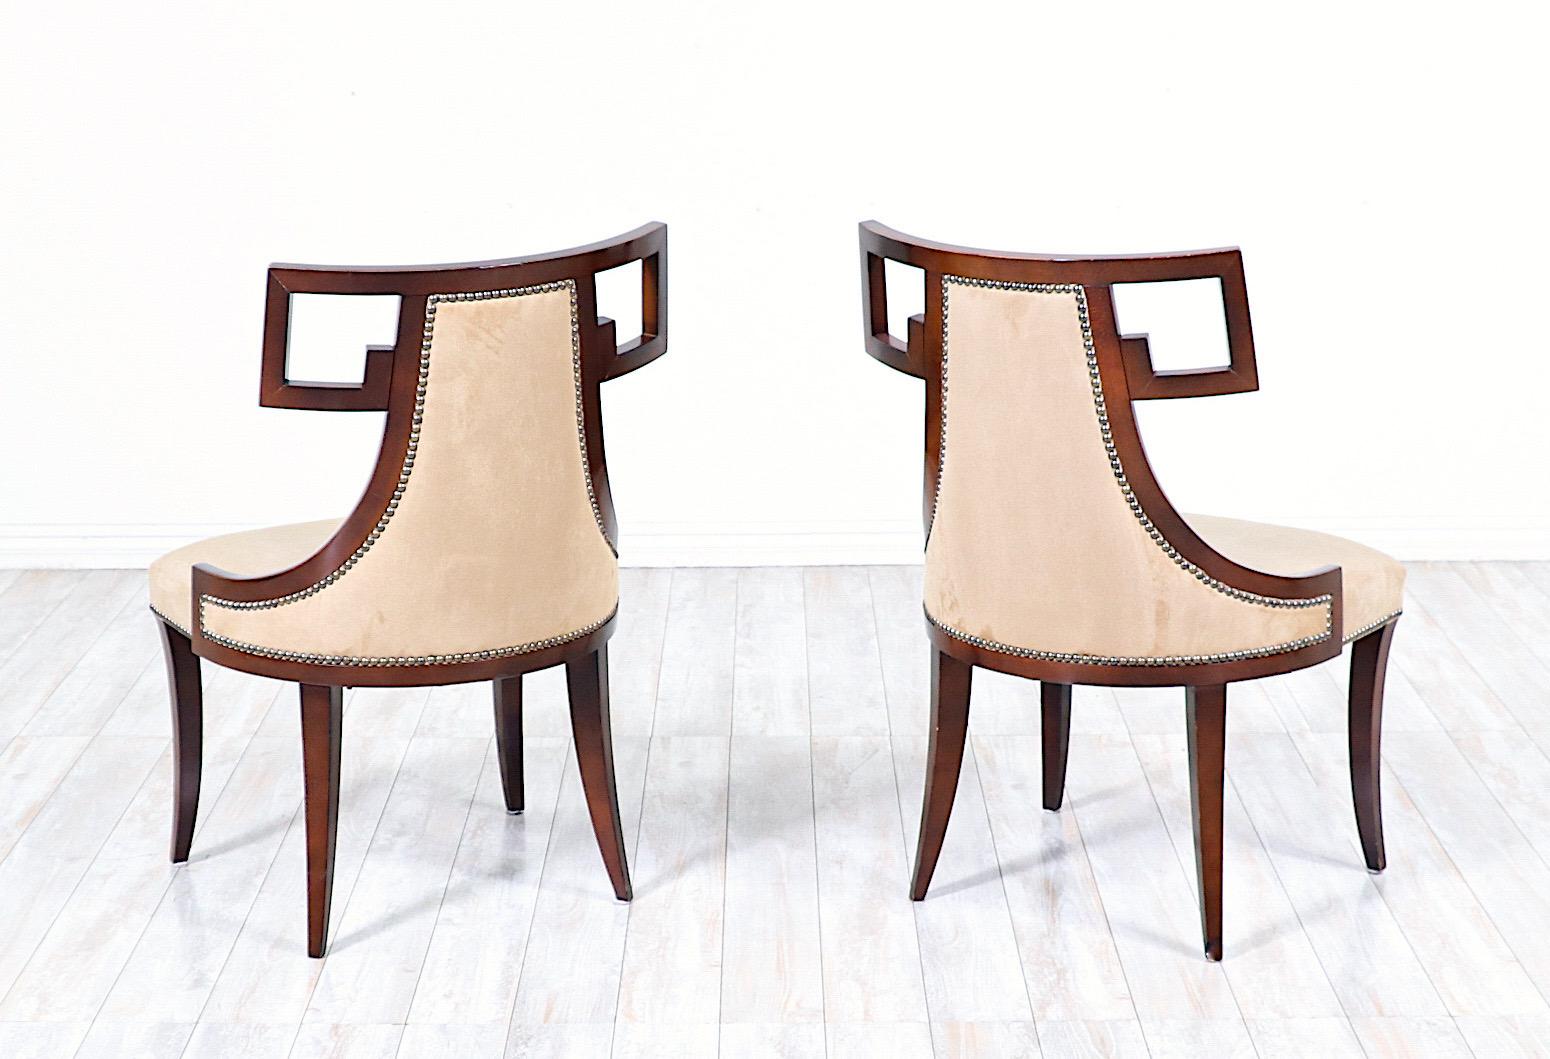 American Set of Four “Greek” Dining Chairs by Baker Furniture